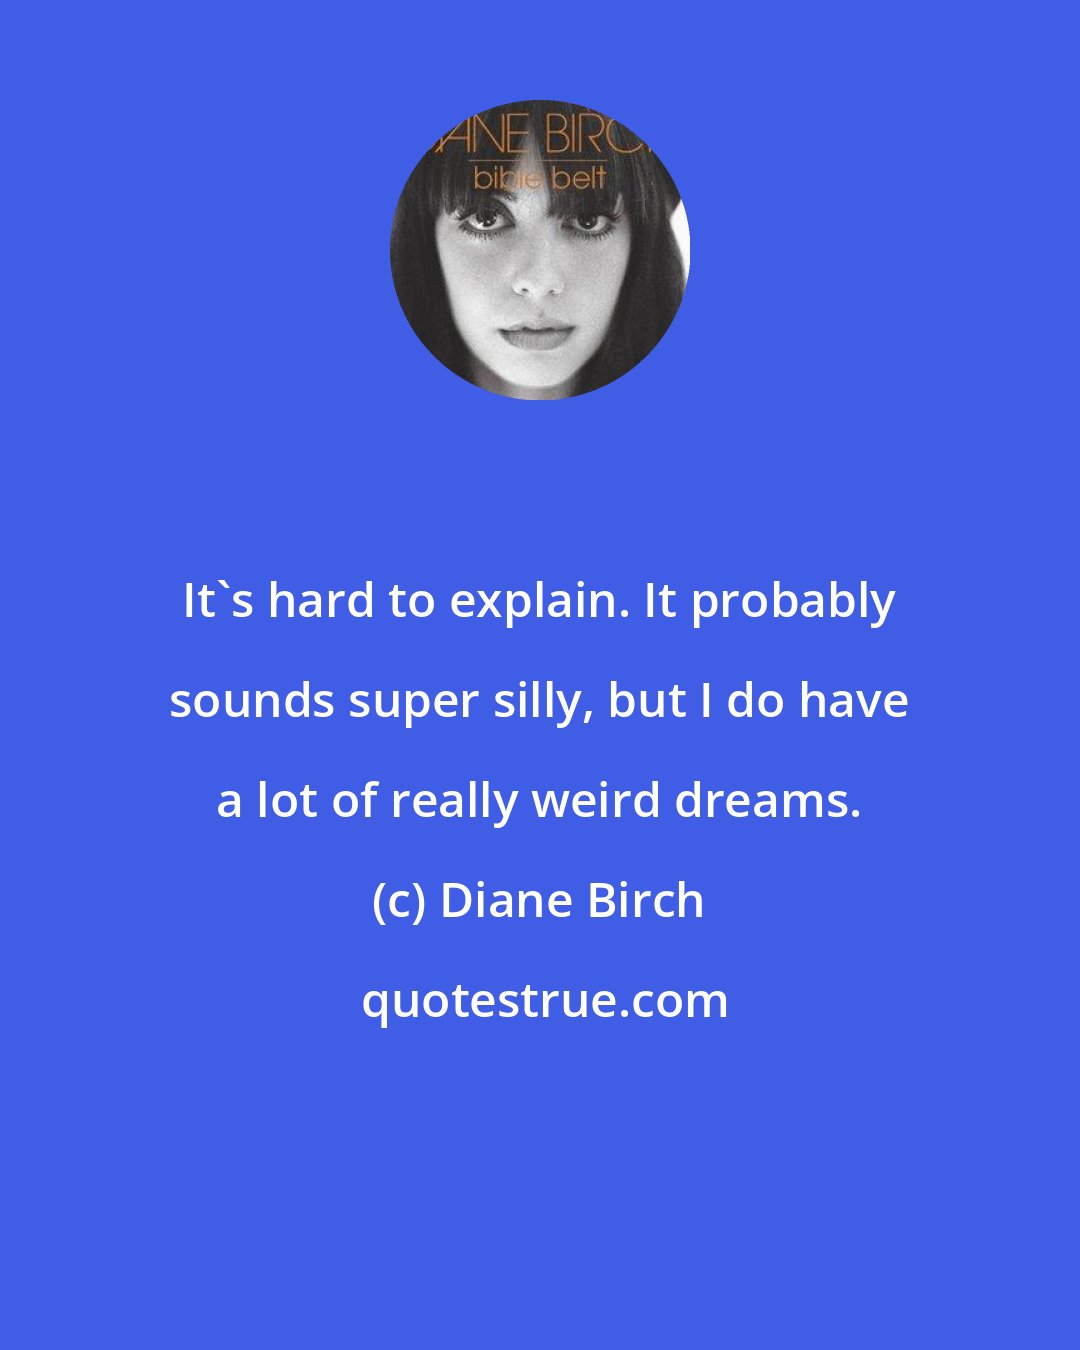 Diane Birch: It's hard to explain. It probably sounds super silly, but I do have a lot of really weird dreams.